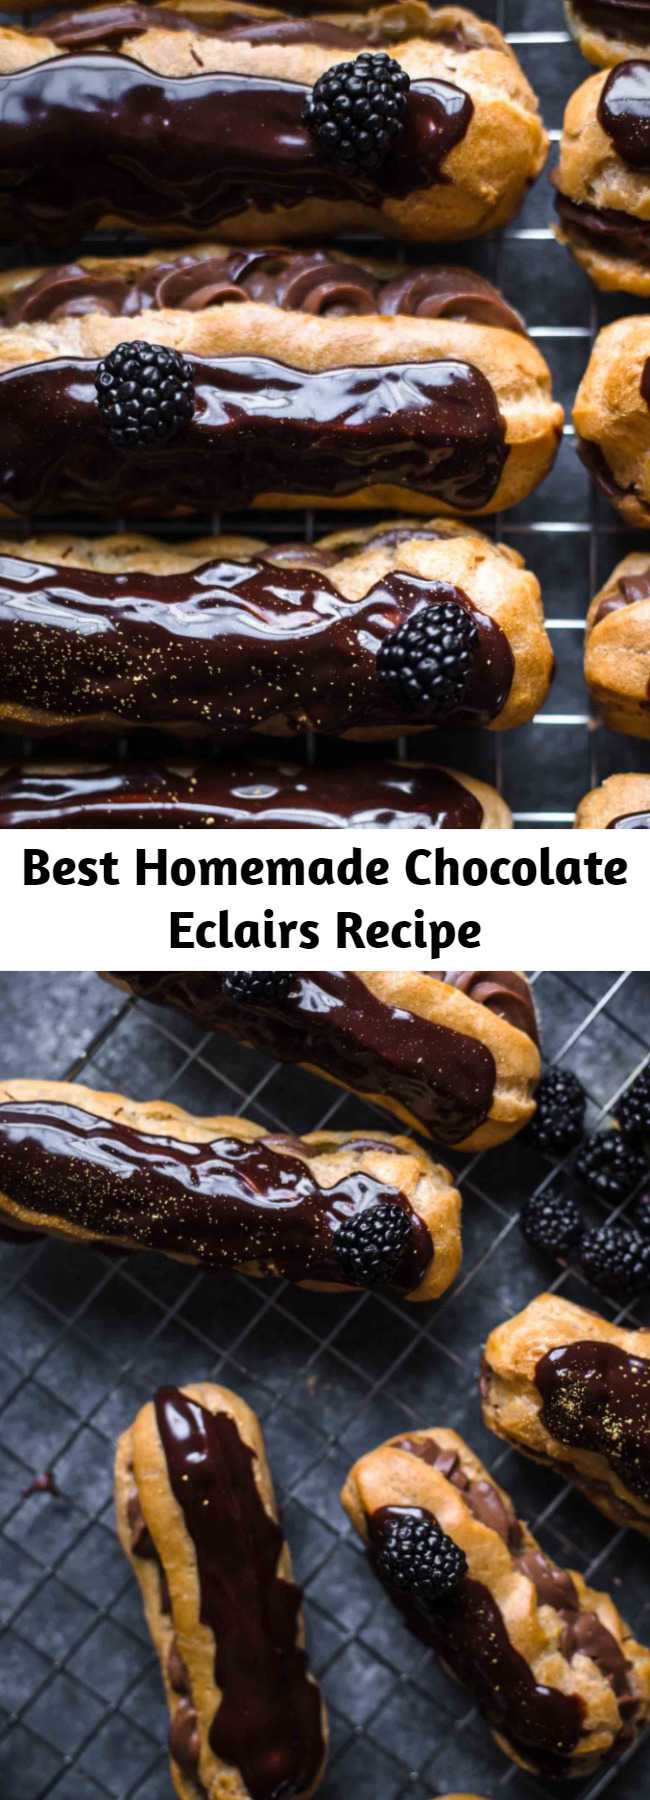 Best Homemade Chocolate Eclairs Recipe - These are the best homemade Chocolate Eclairs you will ever have. It’s an original French recipe! Light and airy Pâte à Choux filled with super creamy chocolate cream filling and topped with delicious chocolate ganache. #eclairs #chocolate #baking #sweets #desserts